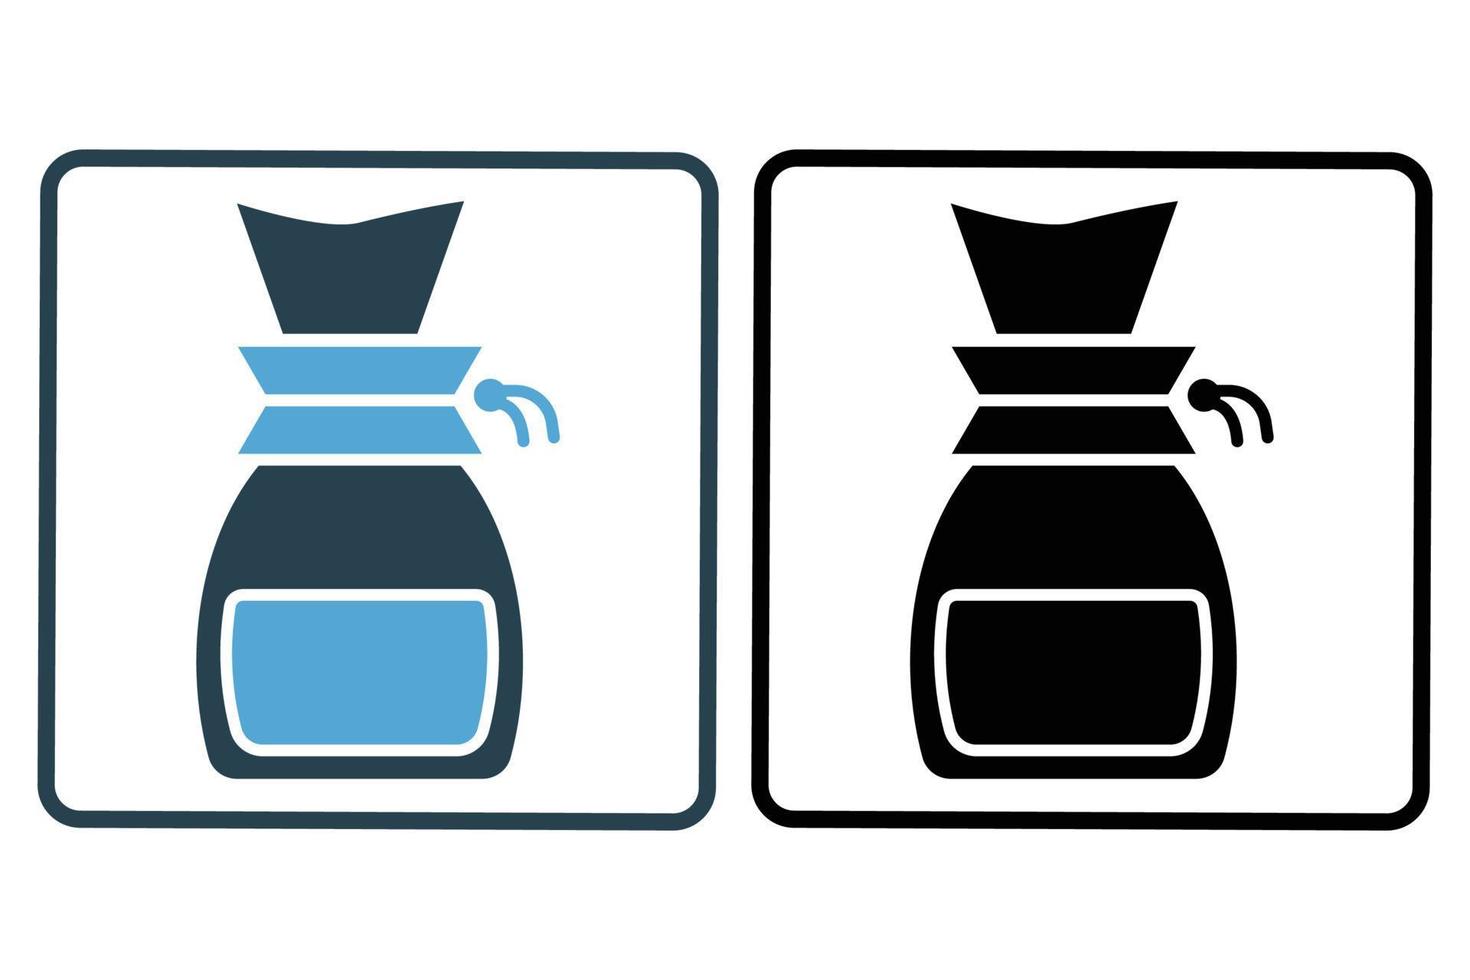 Chemex icon illustration. icon related to coffee element. Solid icon style. Simple vector design editable